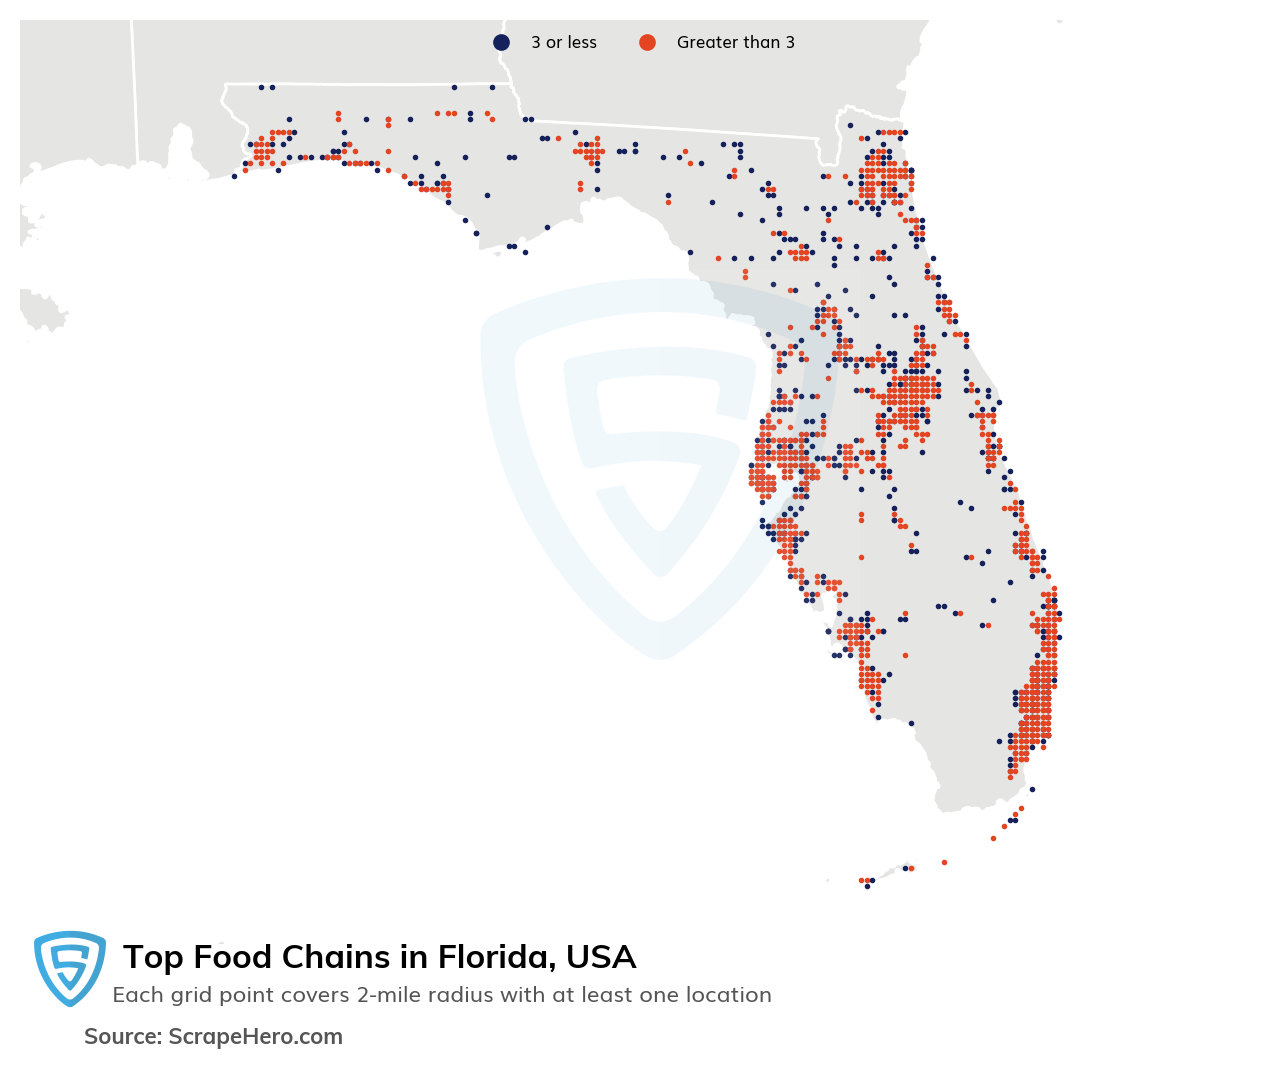 Map of 10 Largest Food Chains in Florida in 2022 Based on Locations